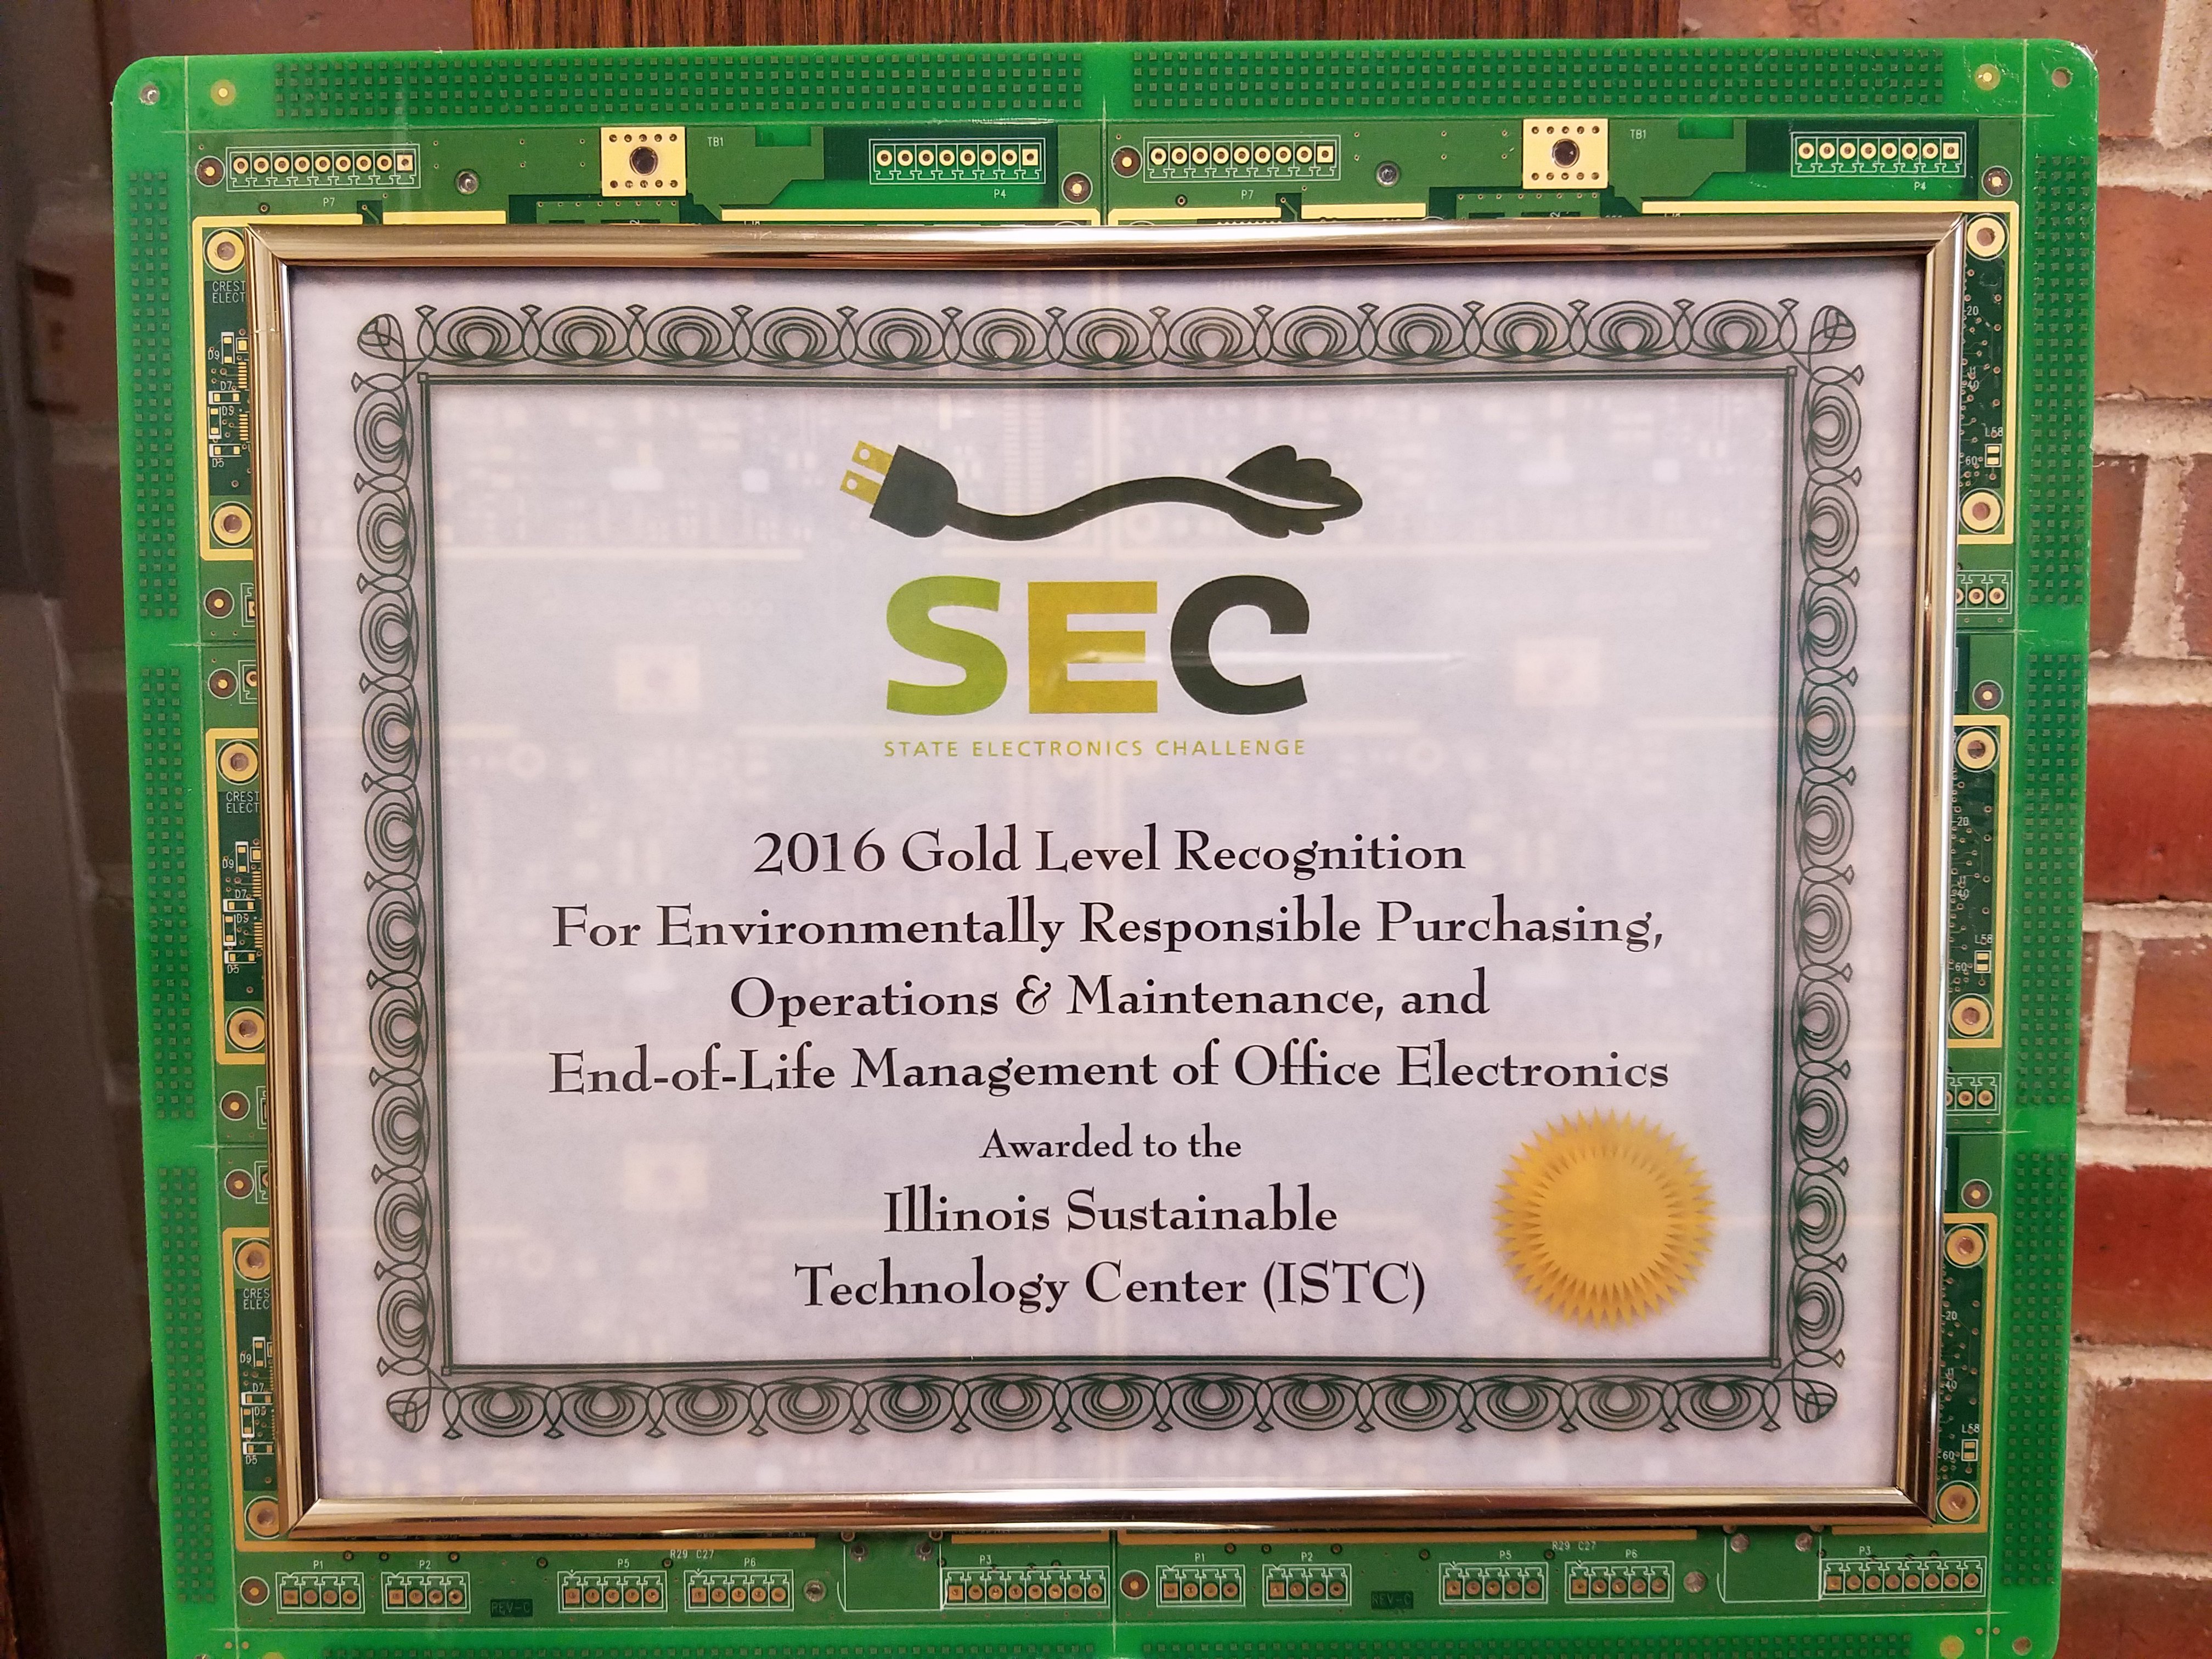 photo of SEC plaque made of circuit boards